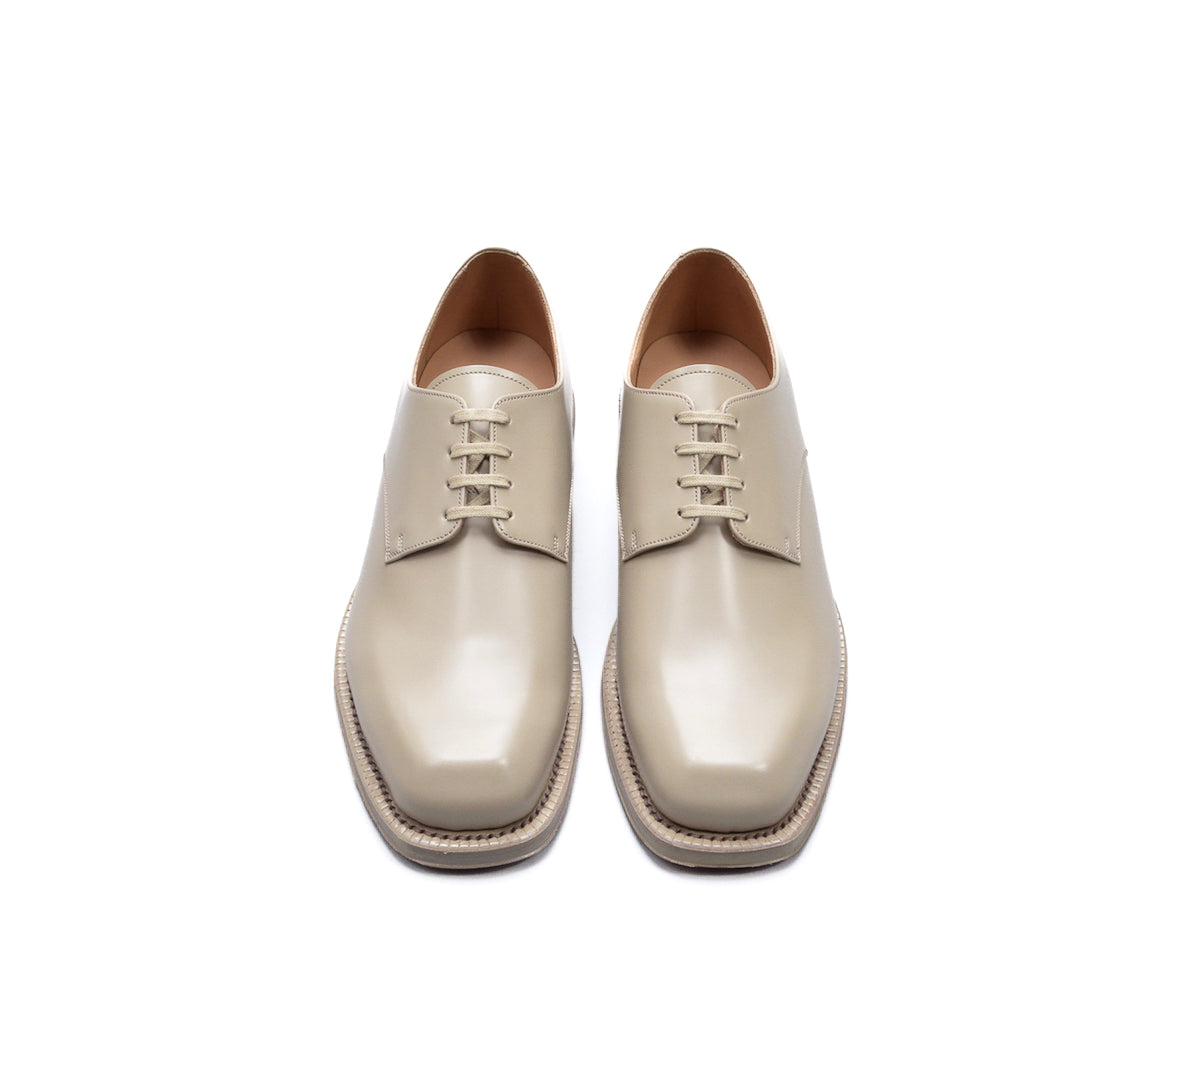 AURALEE「 LEATHER SHOES MADE BY FOOT THE COACHER / BEIGE 」